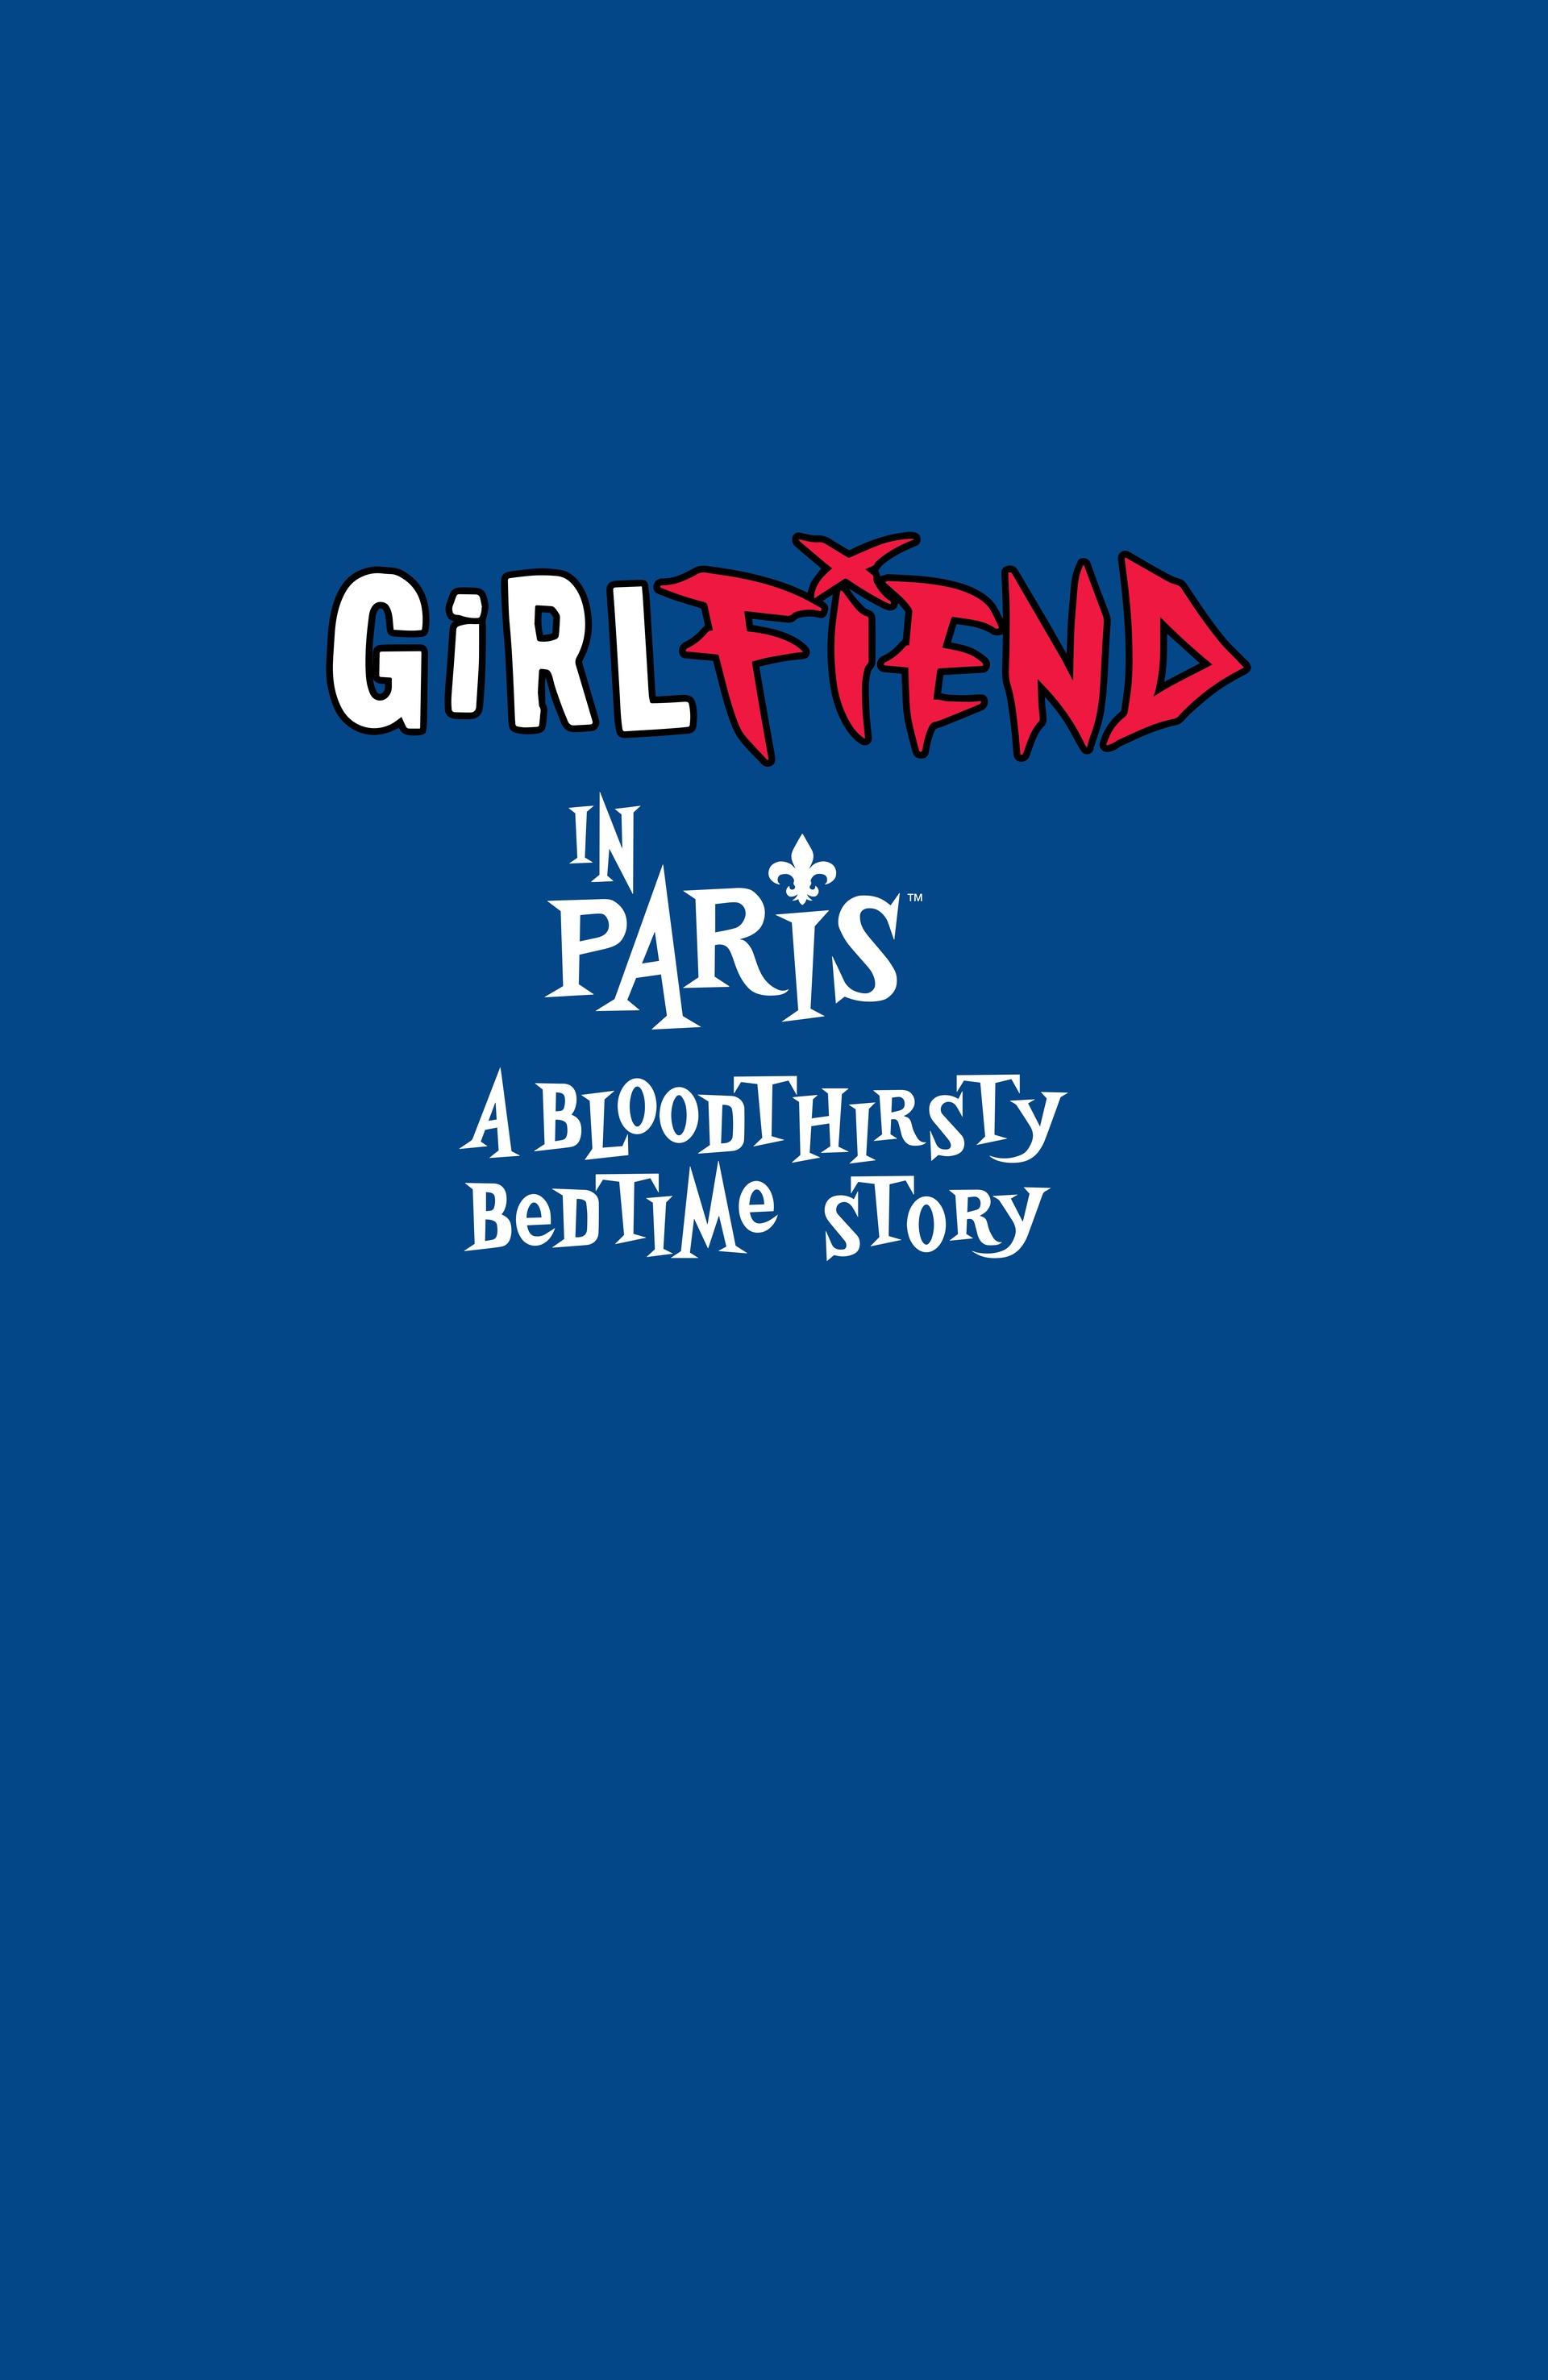 Read online GirlFIEND in Paris: A Bloodthirsty Bedtime Story comic -  Issue # TPB - 4